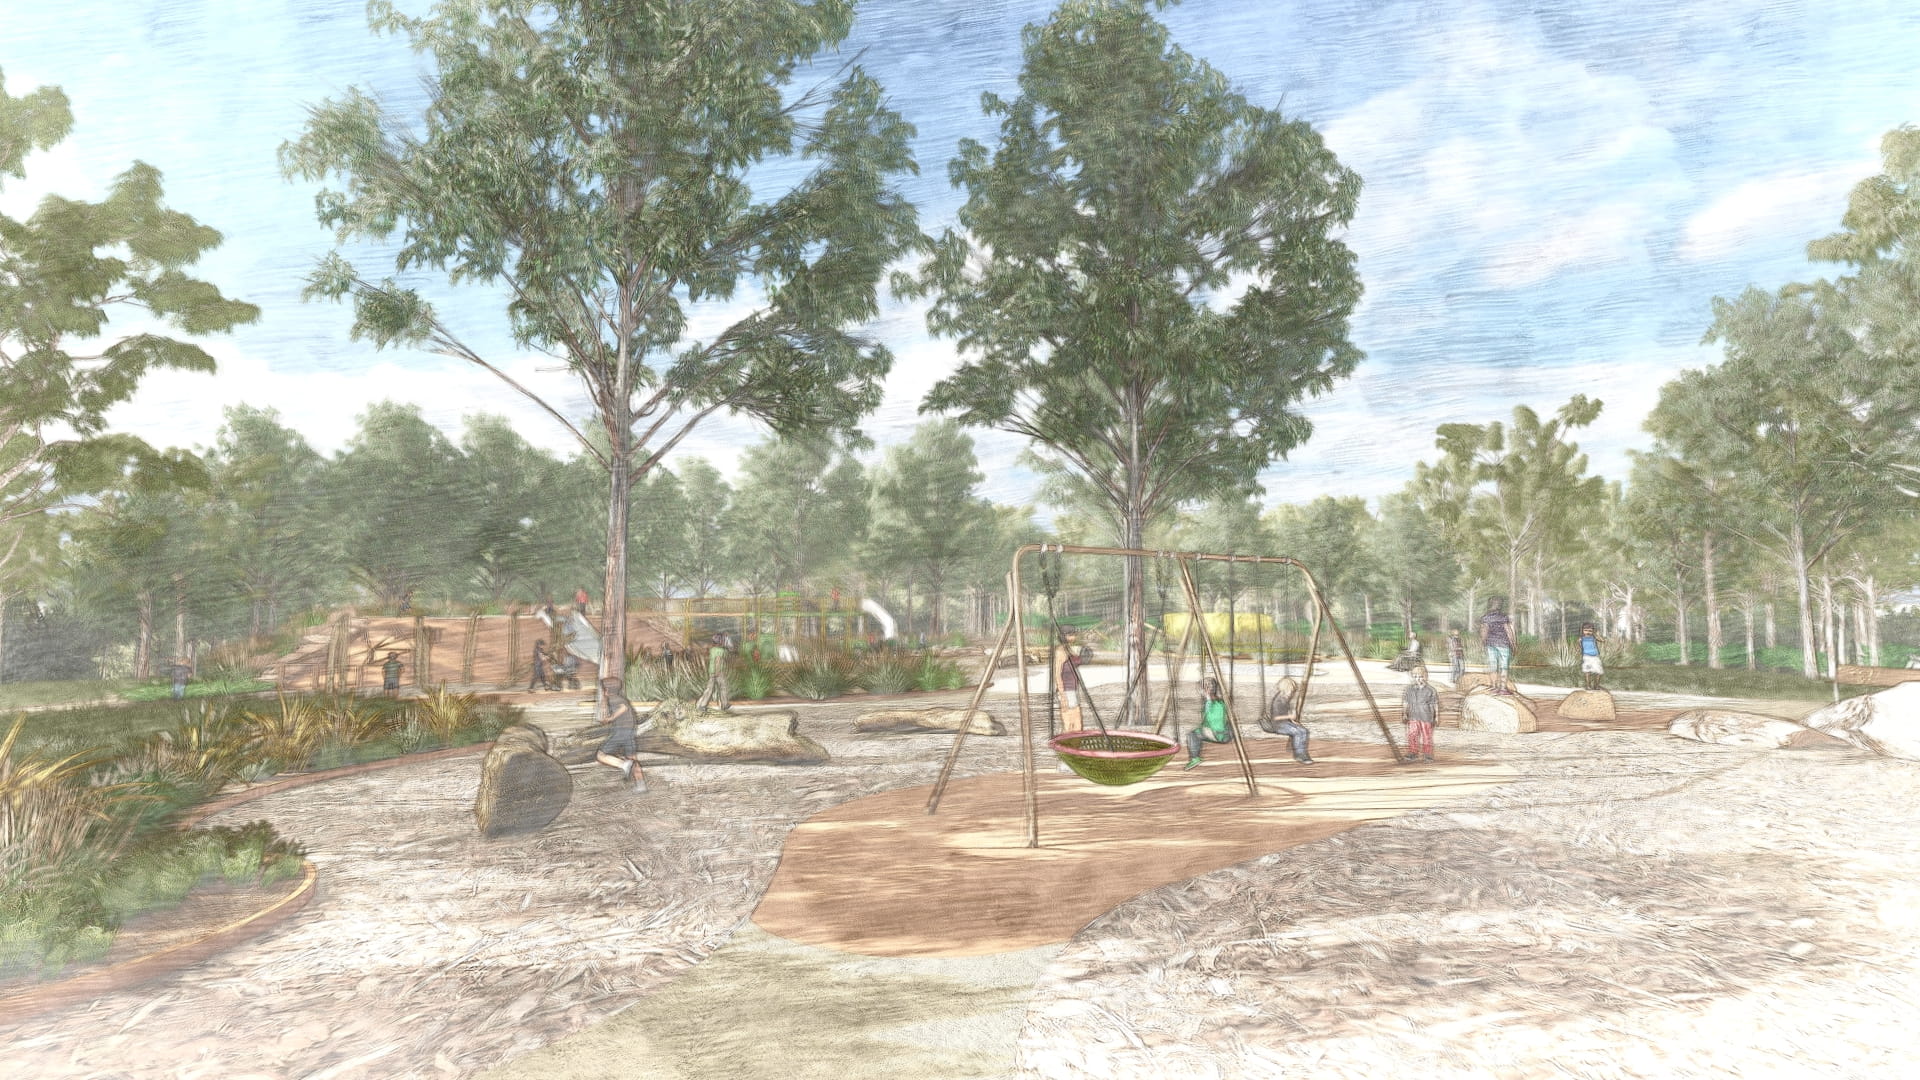 Swing play with planting beds design for the new playscape at Wattle Park